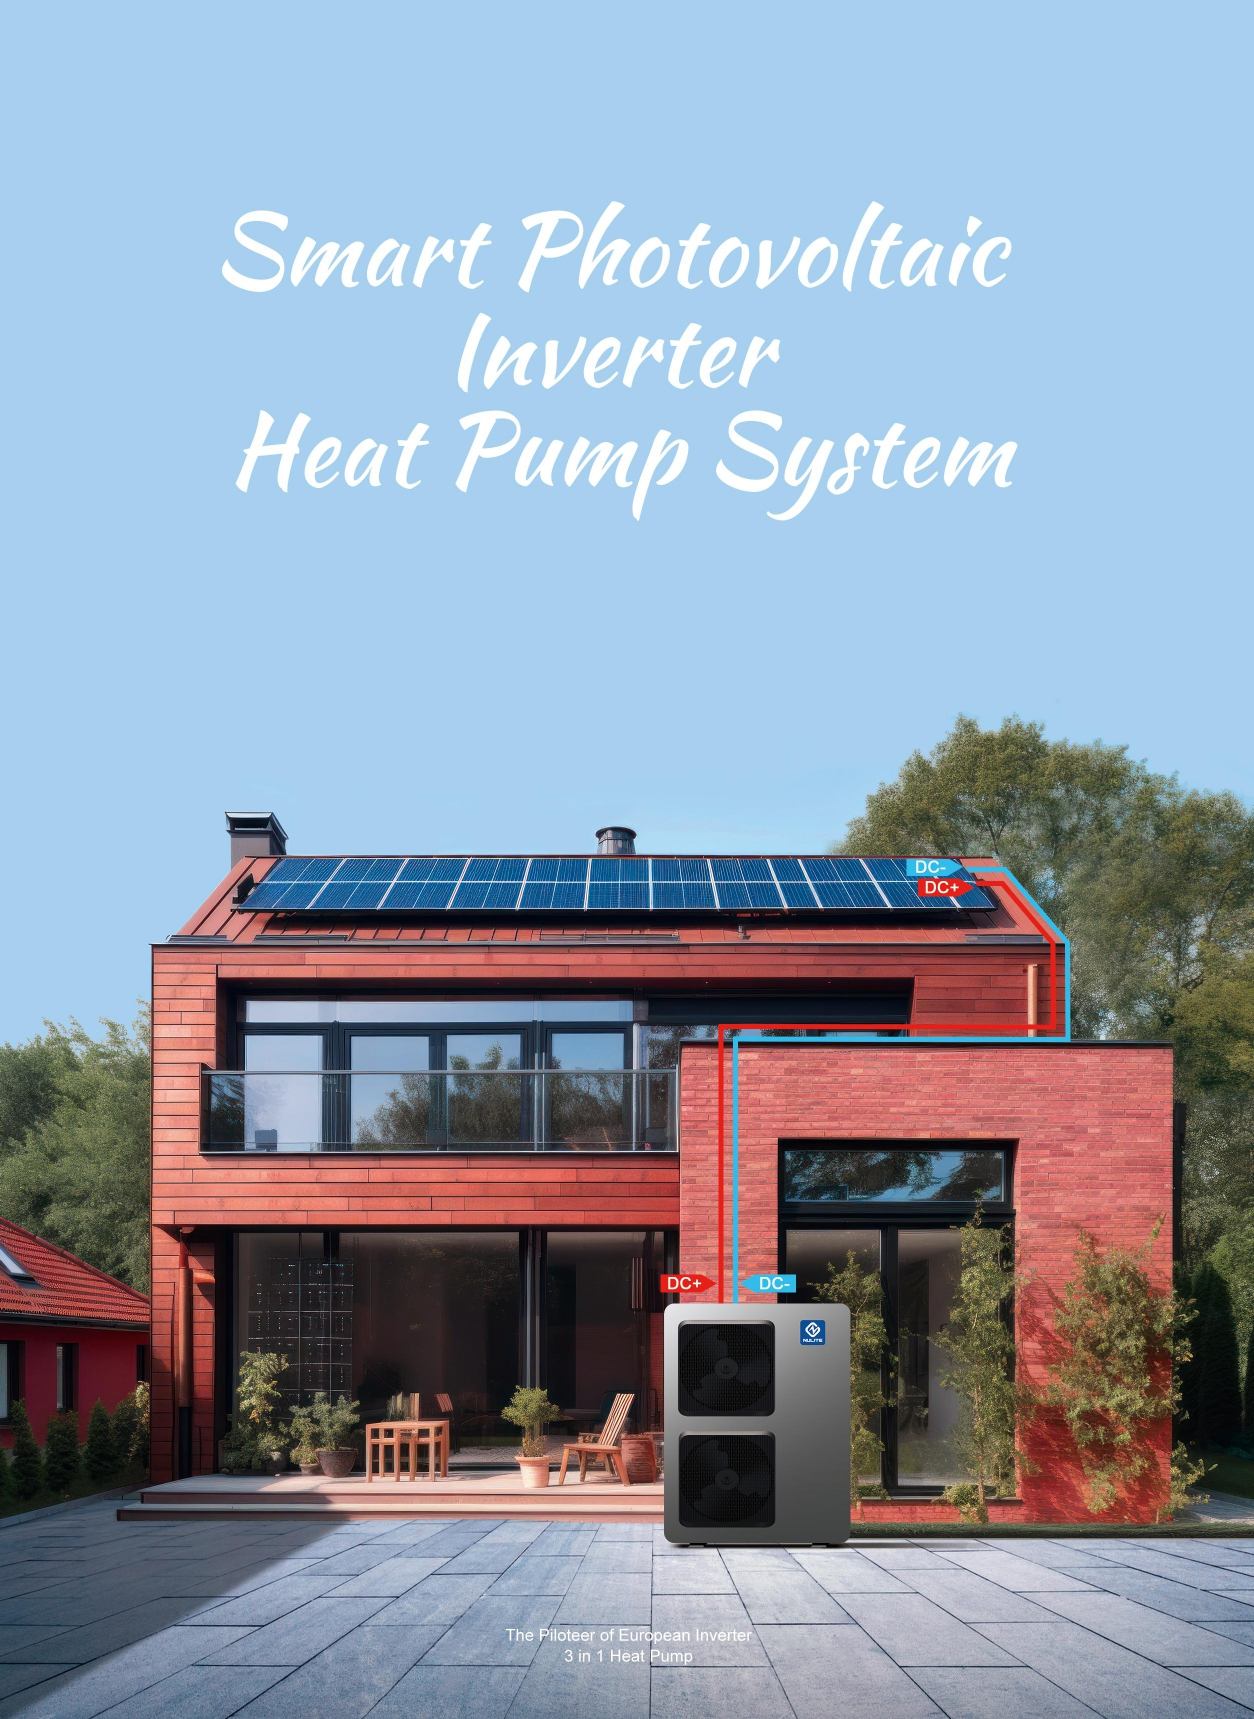 How does the combination of heat pump and photovoltaics work?